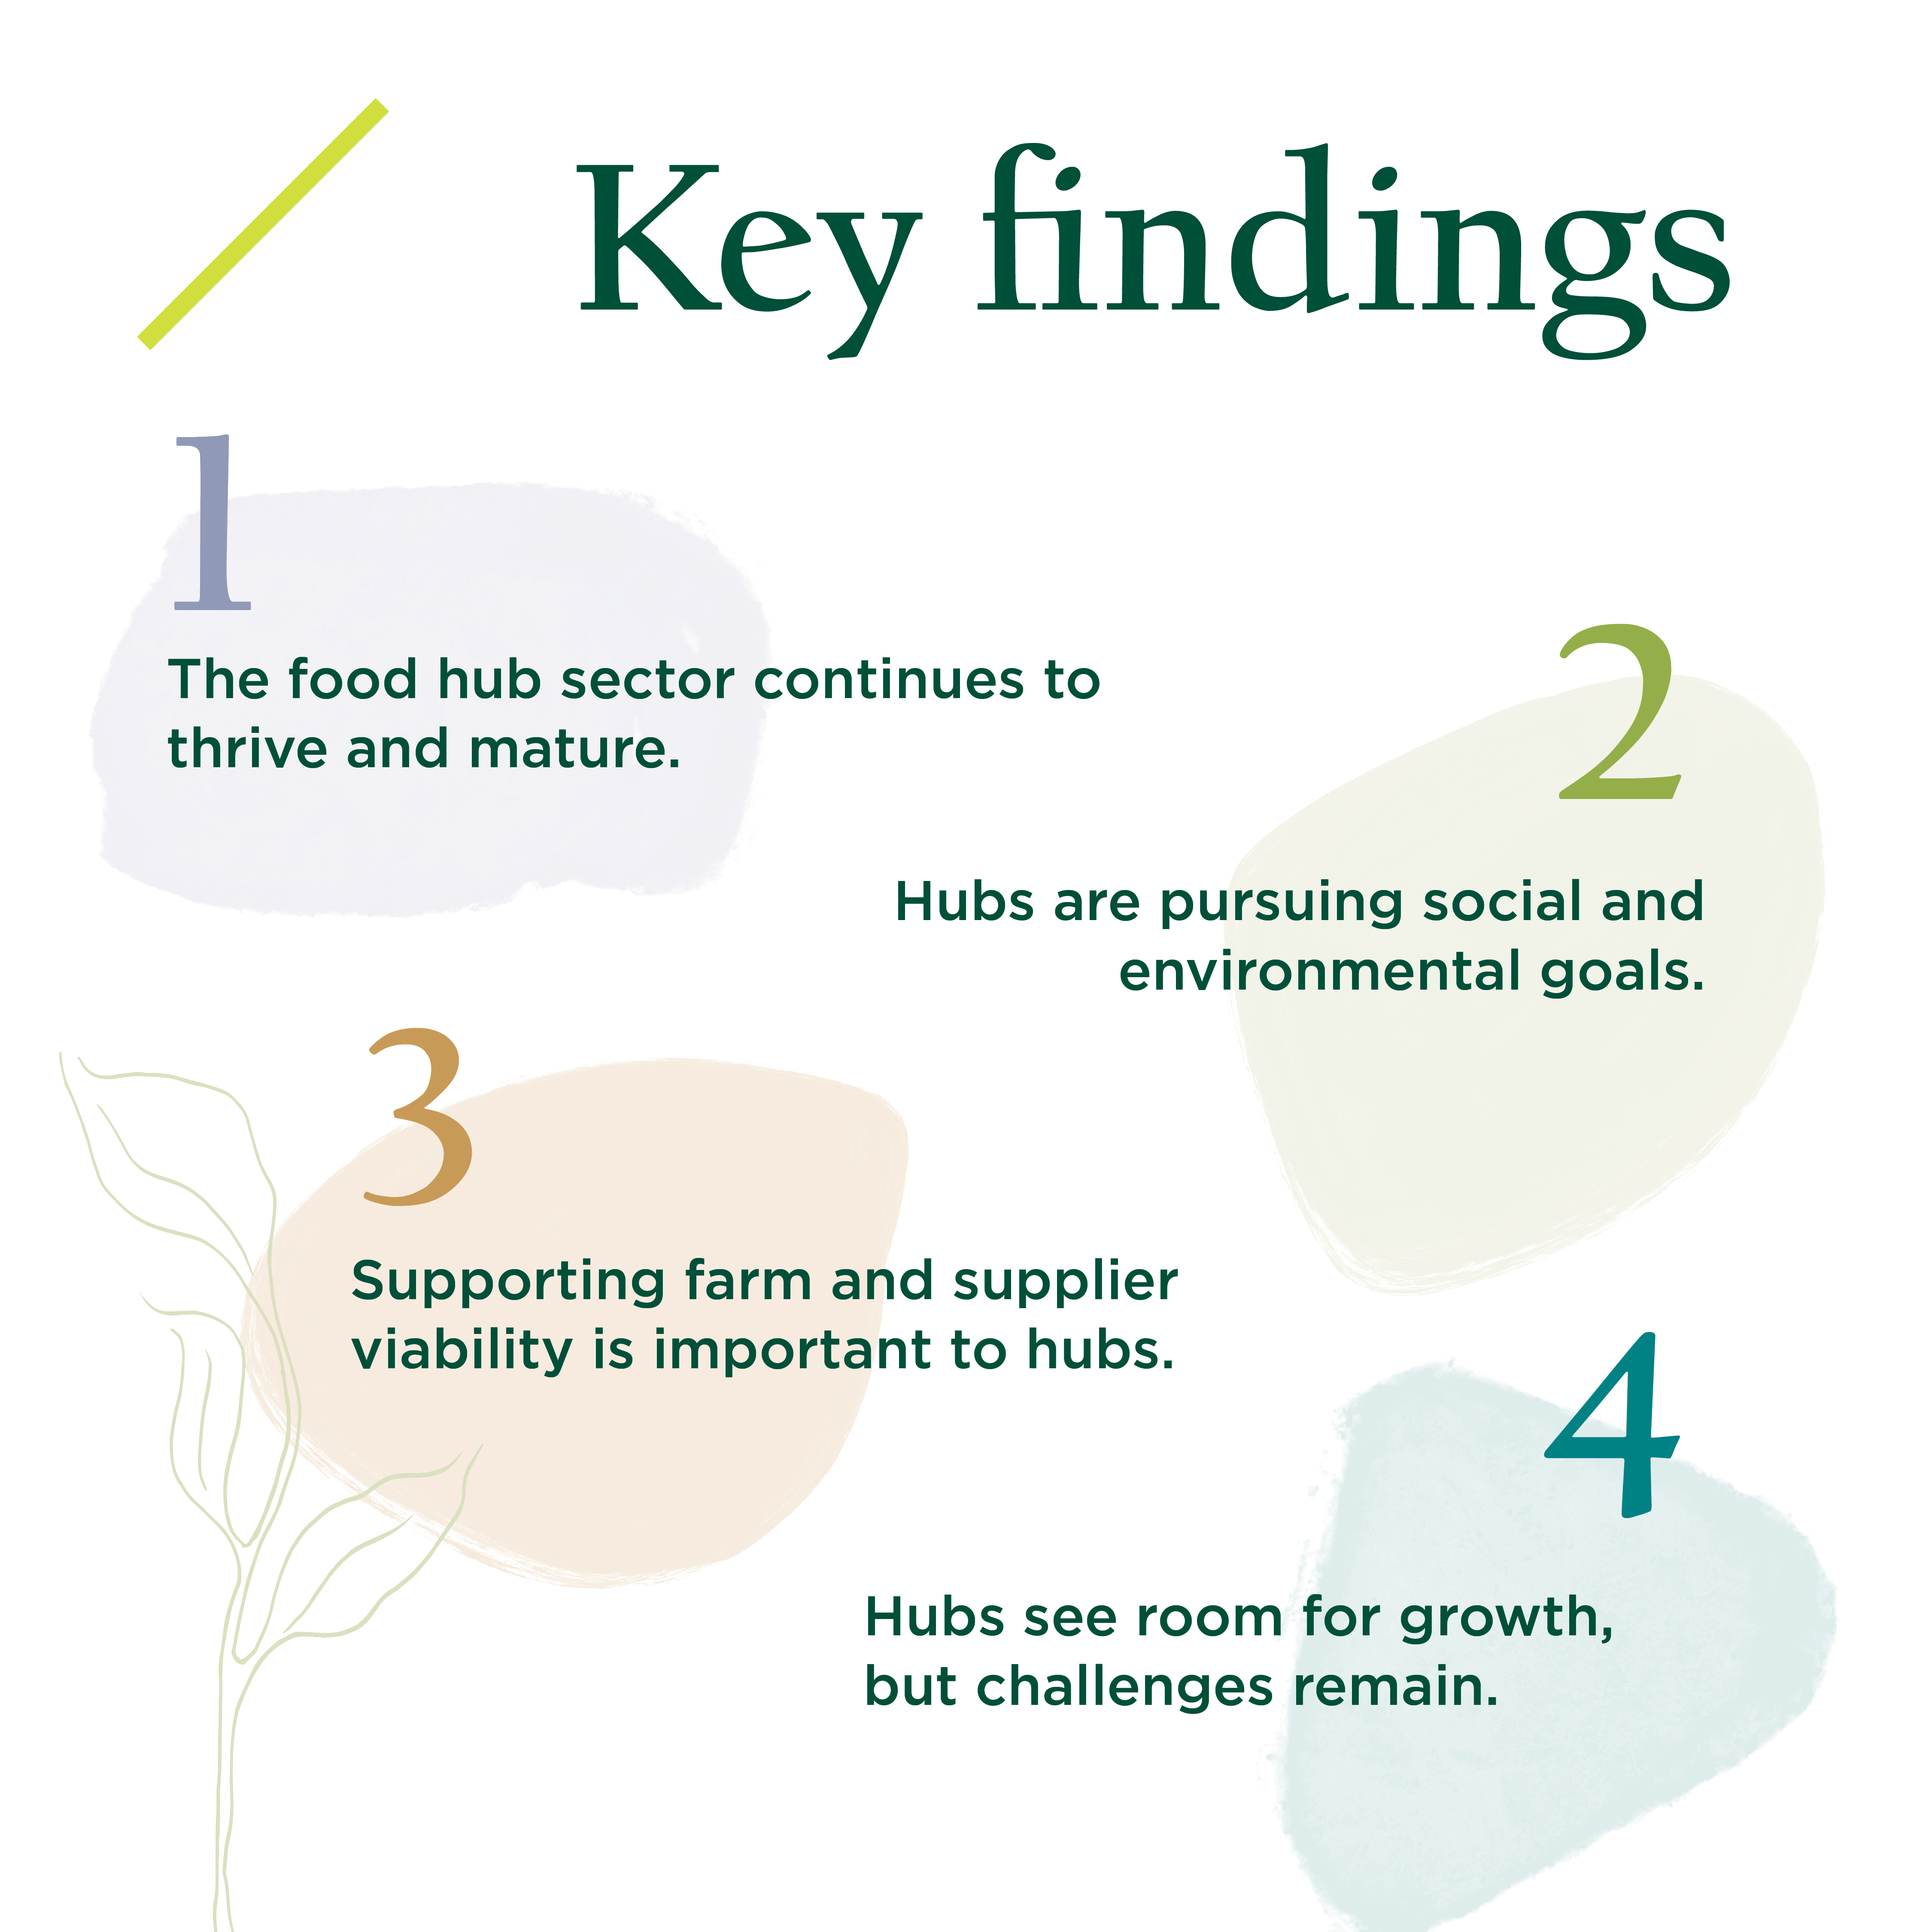 Four key findings of the 2019 National Food Hub Survey. 1. The food hub sector continues to thrive and mature. 2. Hubs are pursuing social and environmental goals. 3. Supporting farm and supplier viability is important to hubs.4. Hubs see room for growth, but challenges remain.